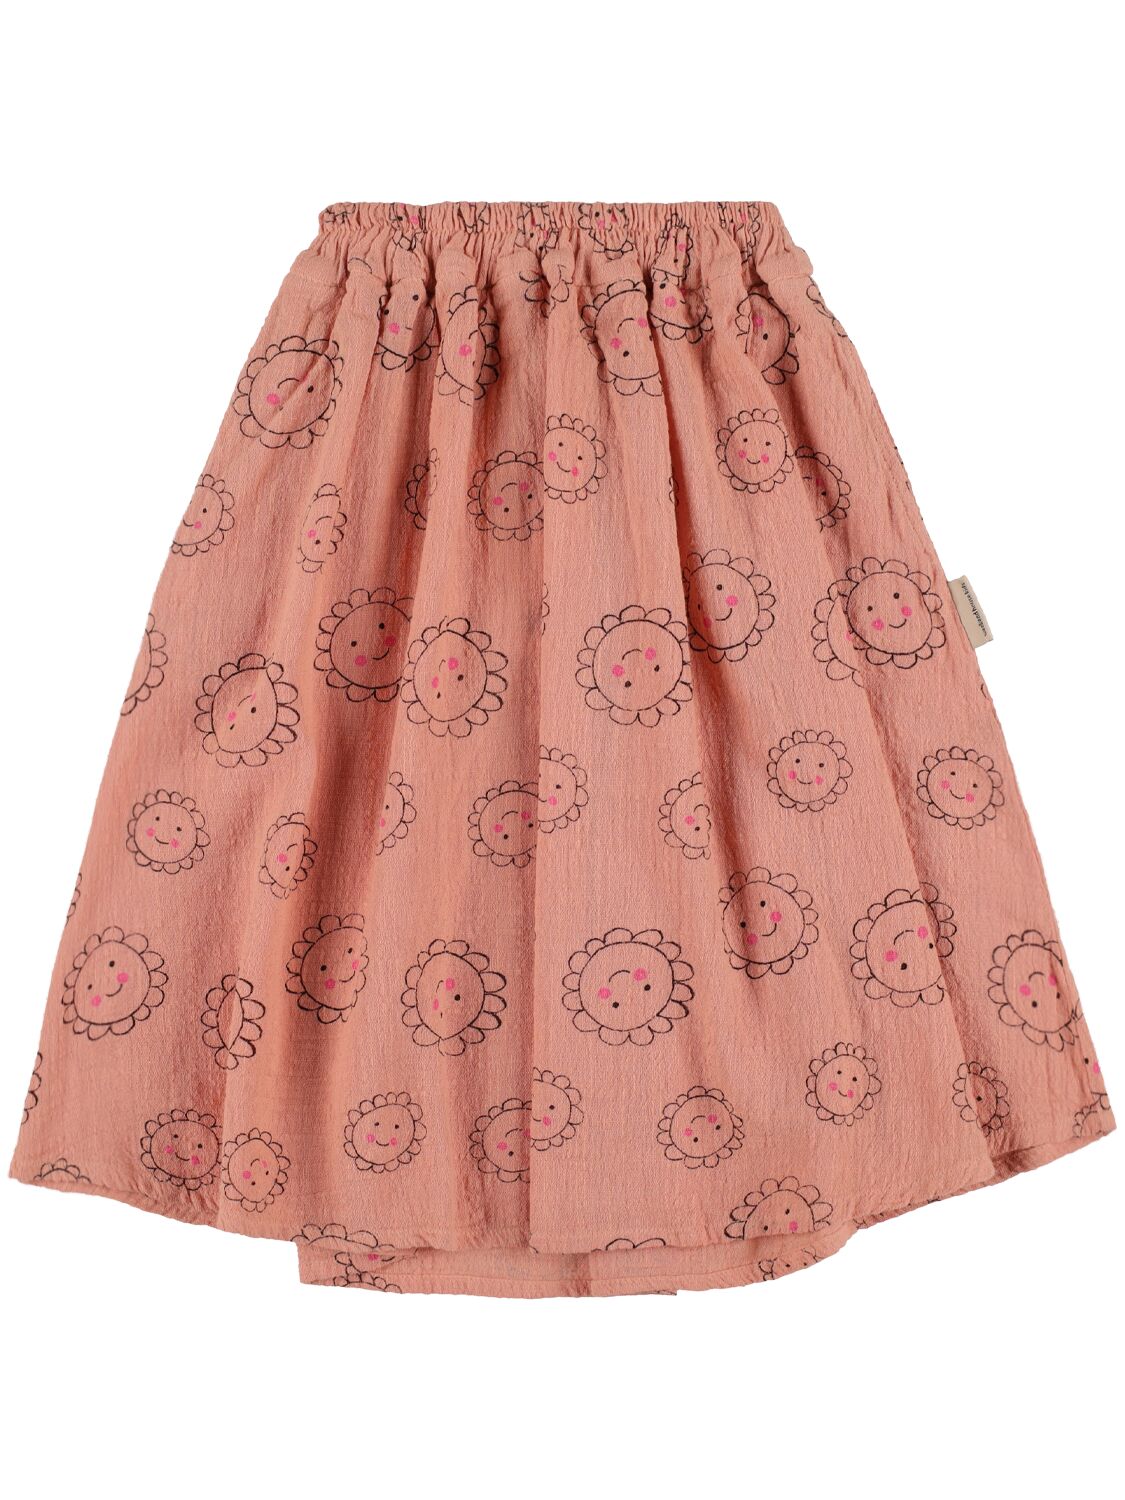 Image of Printed Cotton Blend Skirt